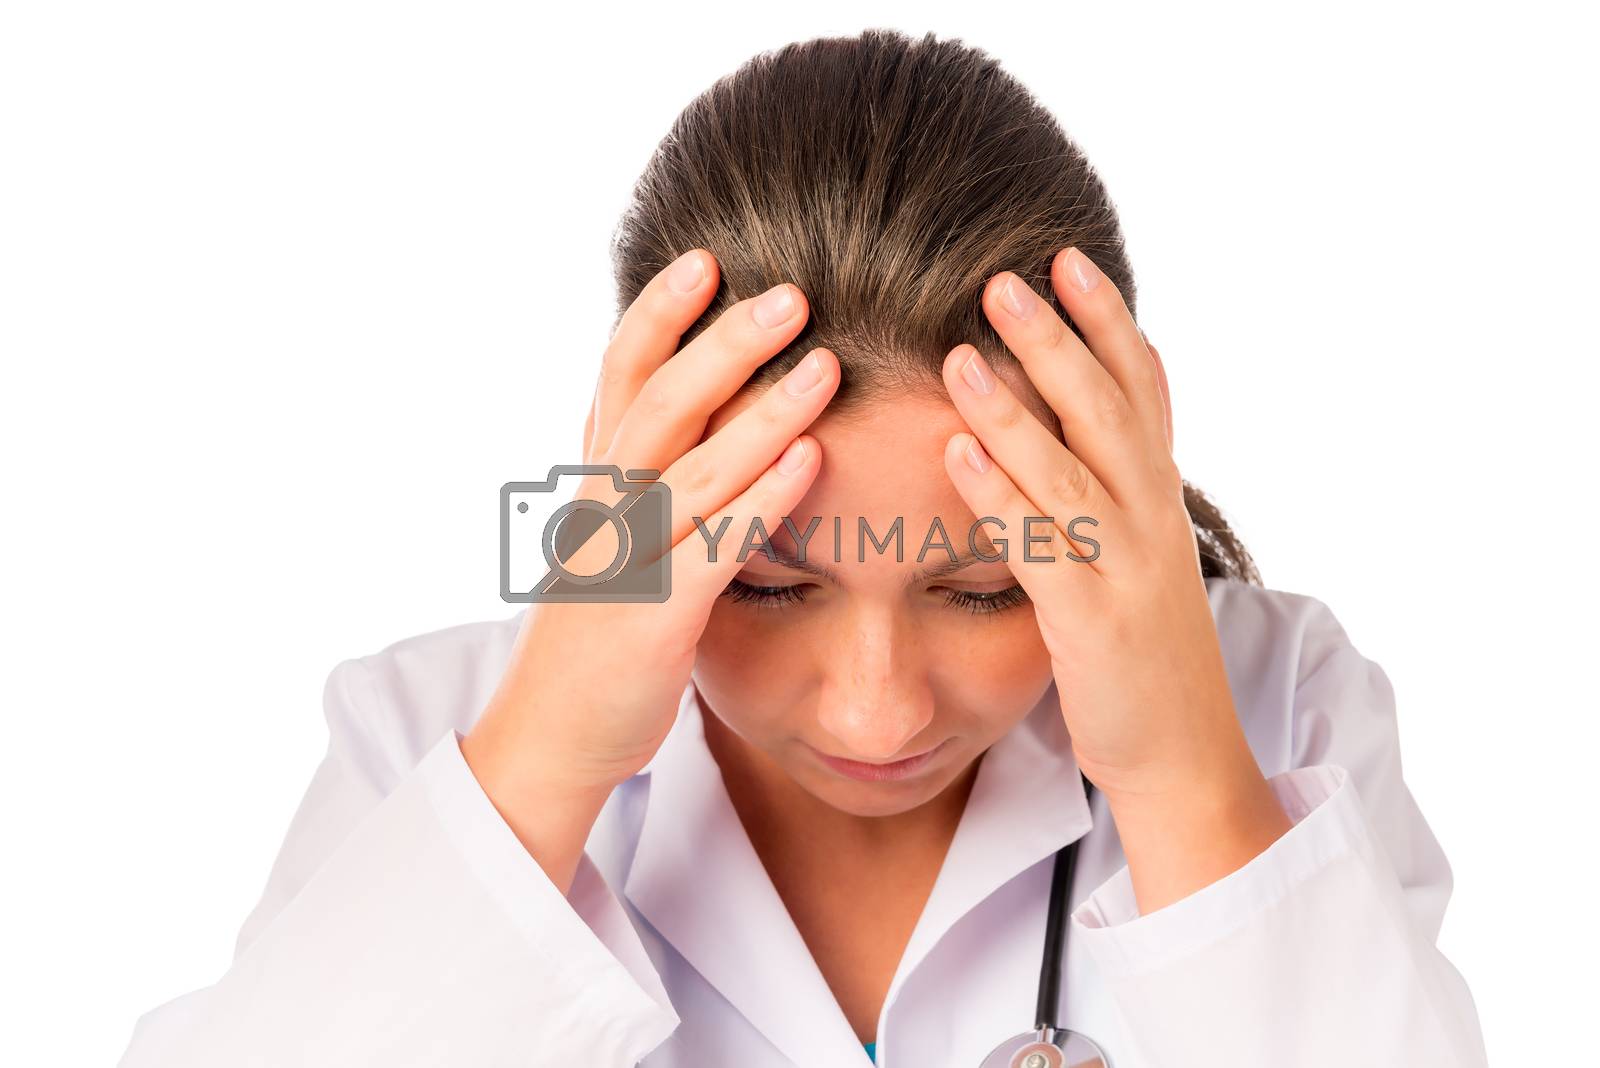 Royalty free image of trouble at work. Portrait of a frustrated of the doctor by kosmsos111